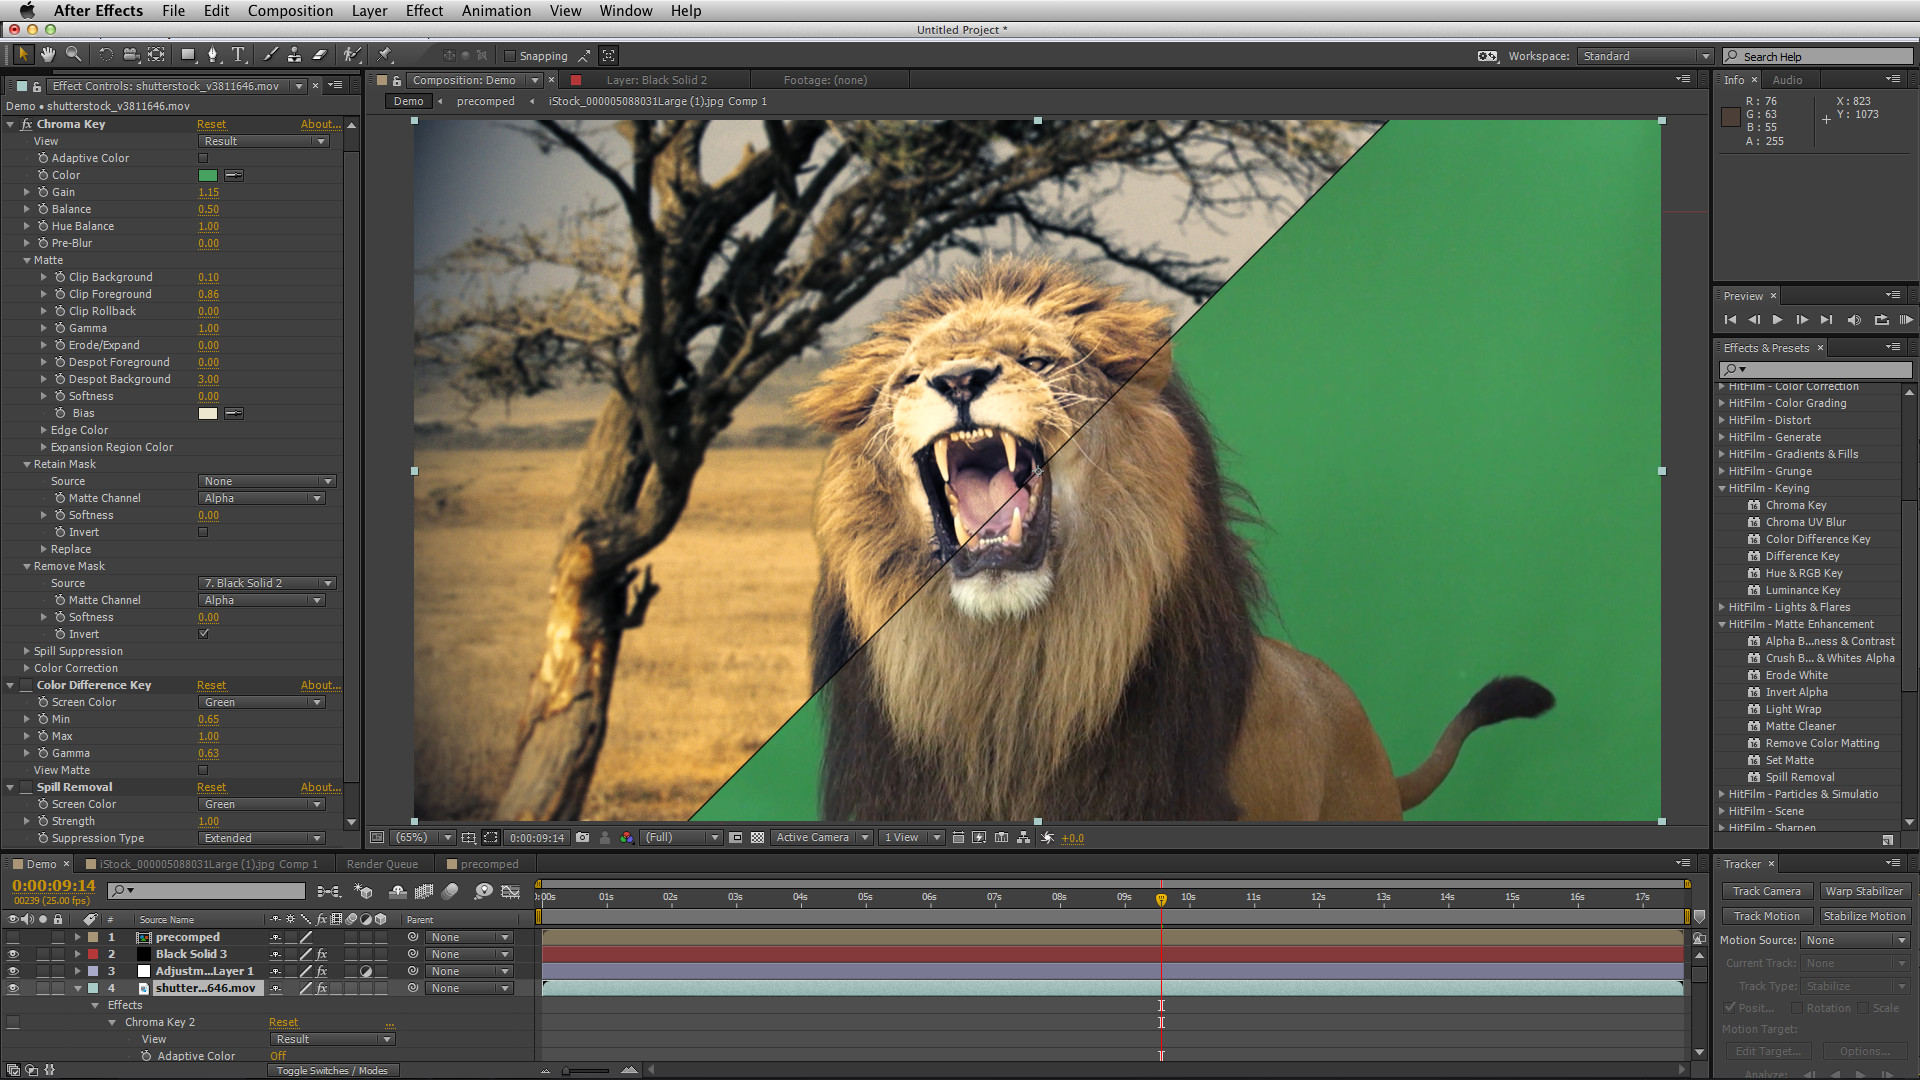 Effet Chrama Key sous After Effects.